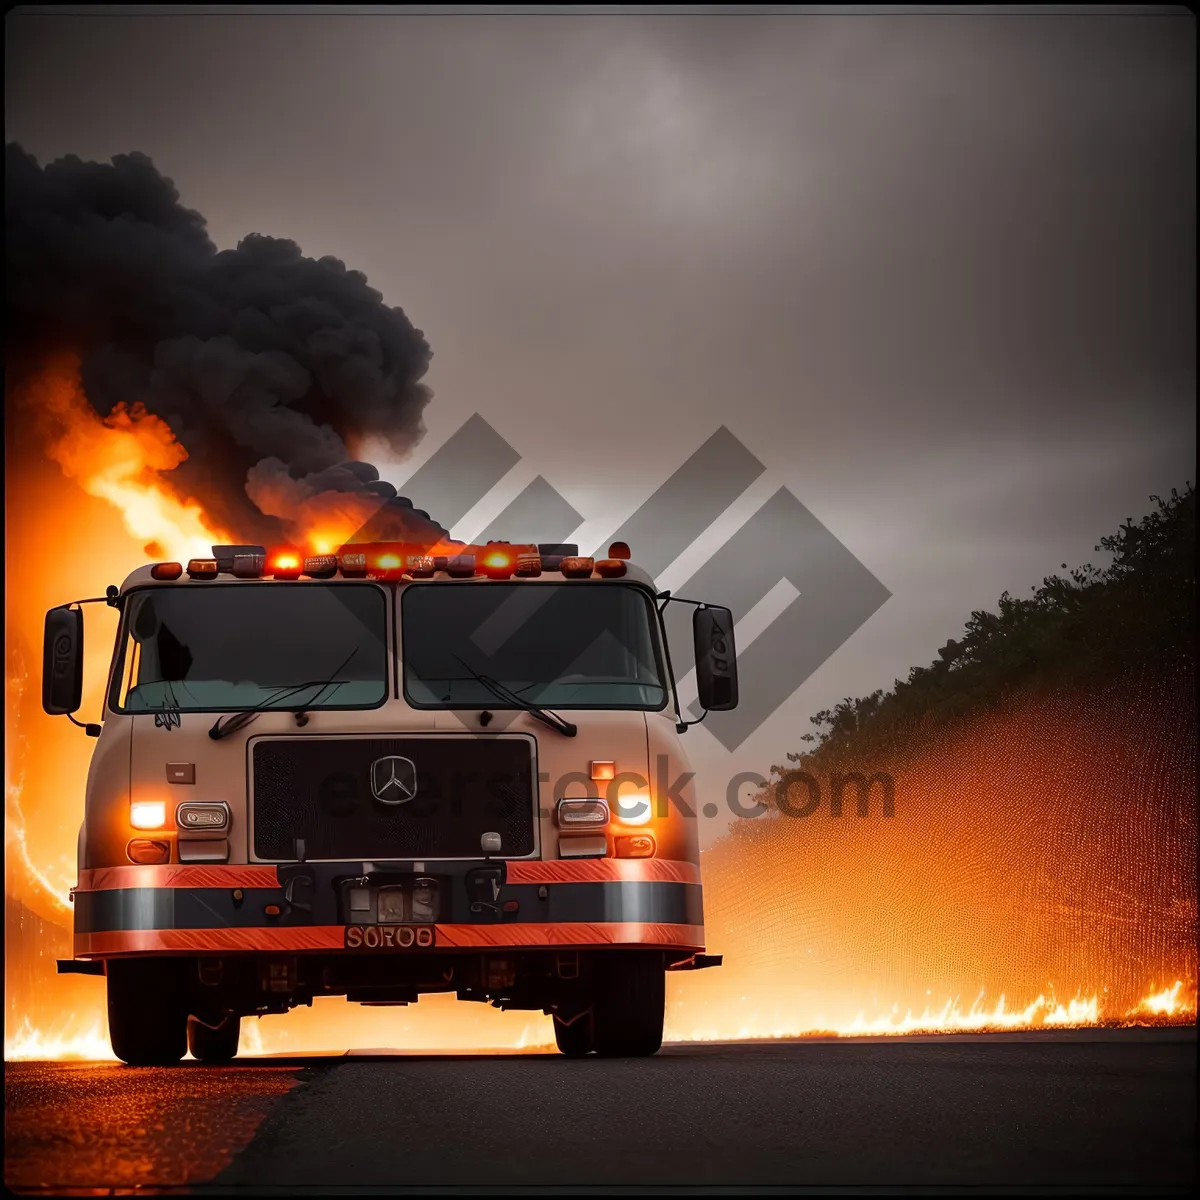 Picture of Fiery Truck Surrounded by Smoke and Danger